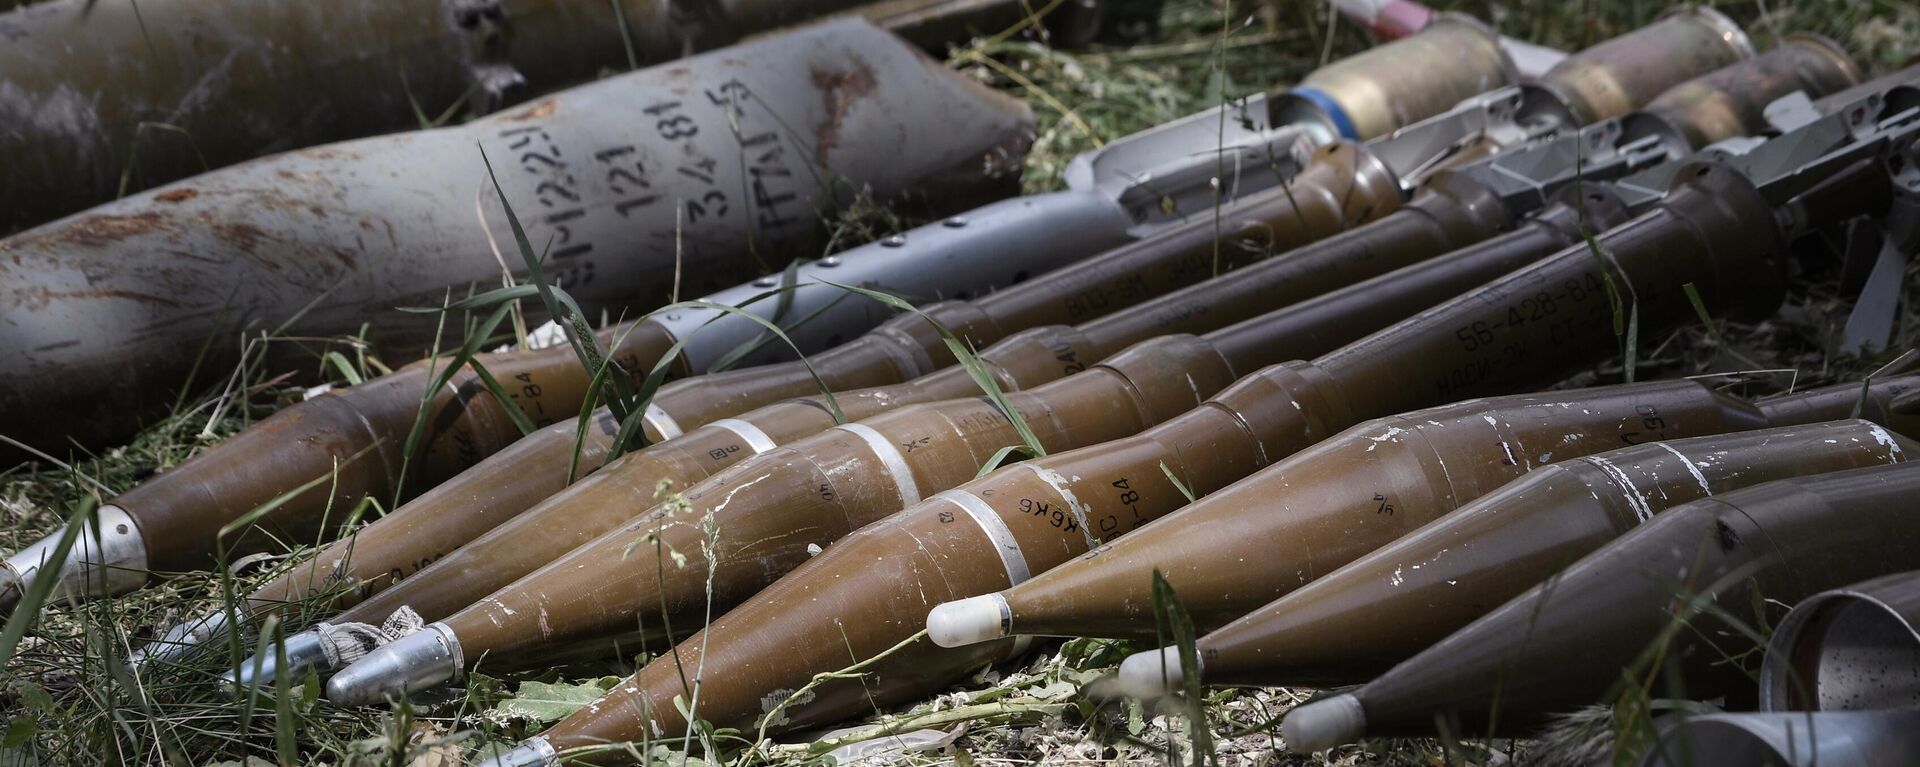 Ammunition abandoned by Ukrainian forces lie on the ground in the street in Mariupol, Donetsk People's Republic. - Sputnik International, 1920, 18.07.2023